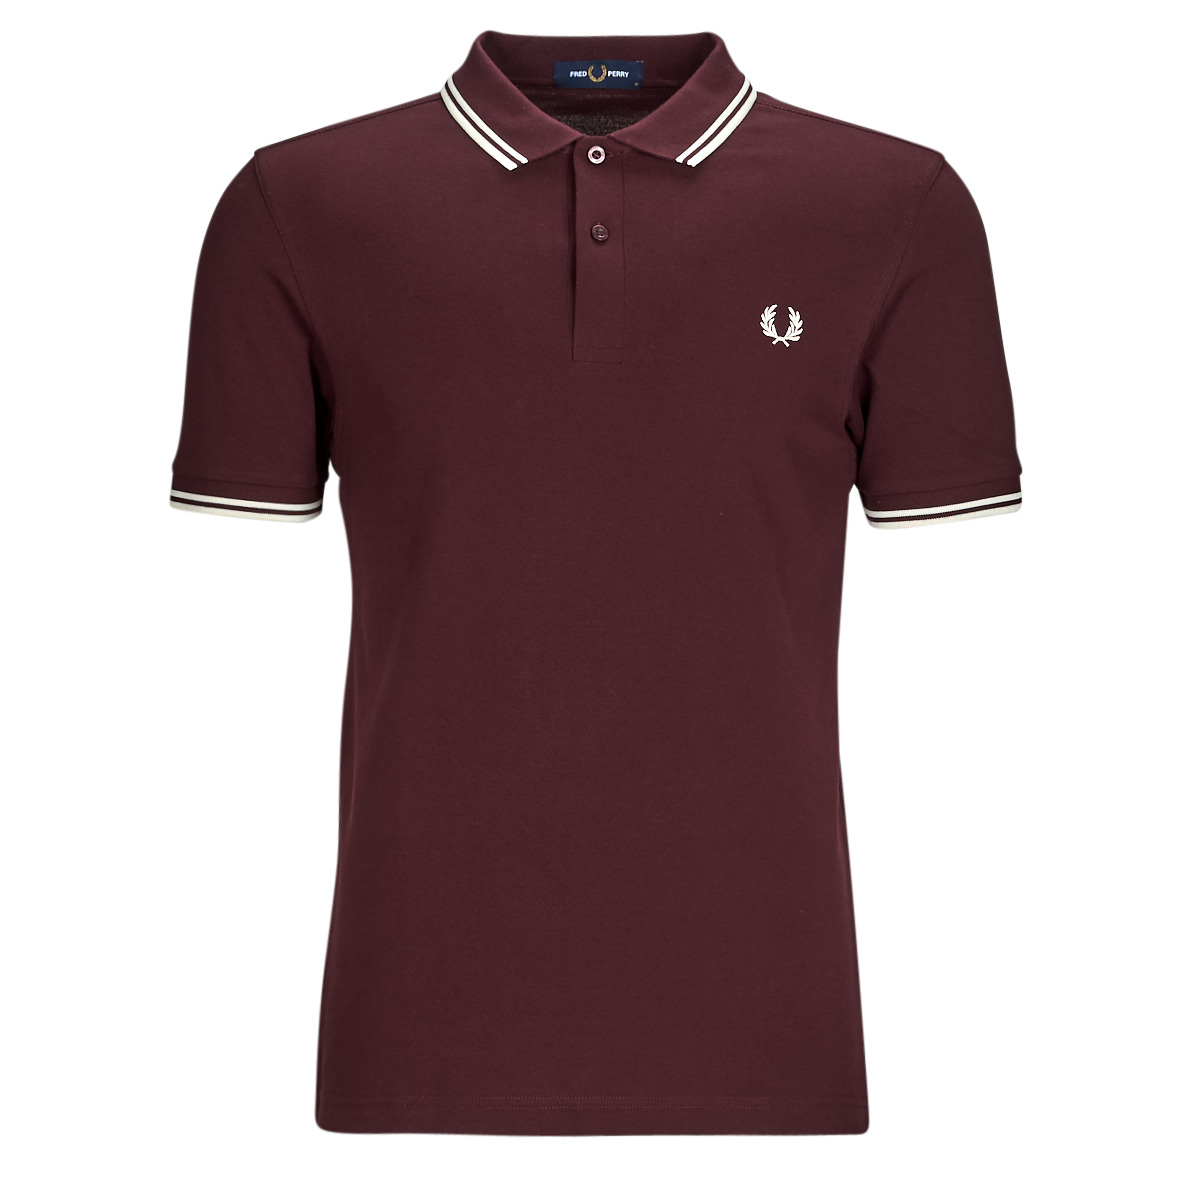 Fred Perry Bordeaux TWIN TIPPED FRED PERRY SHIRT hL6wNo